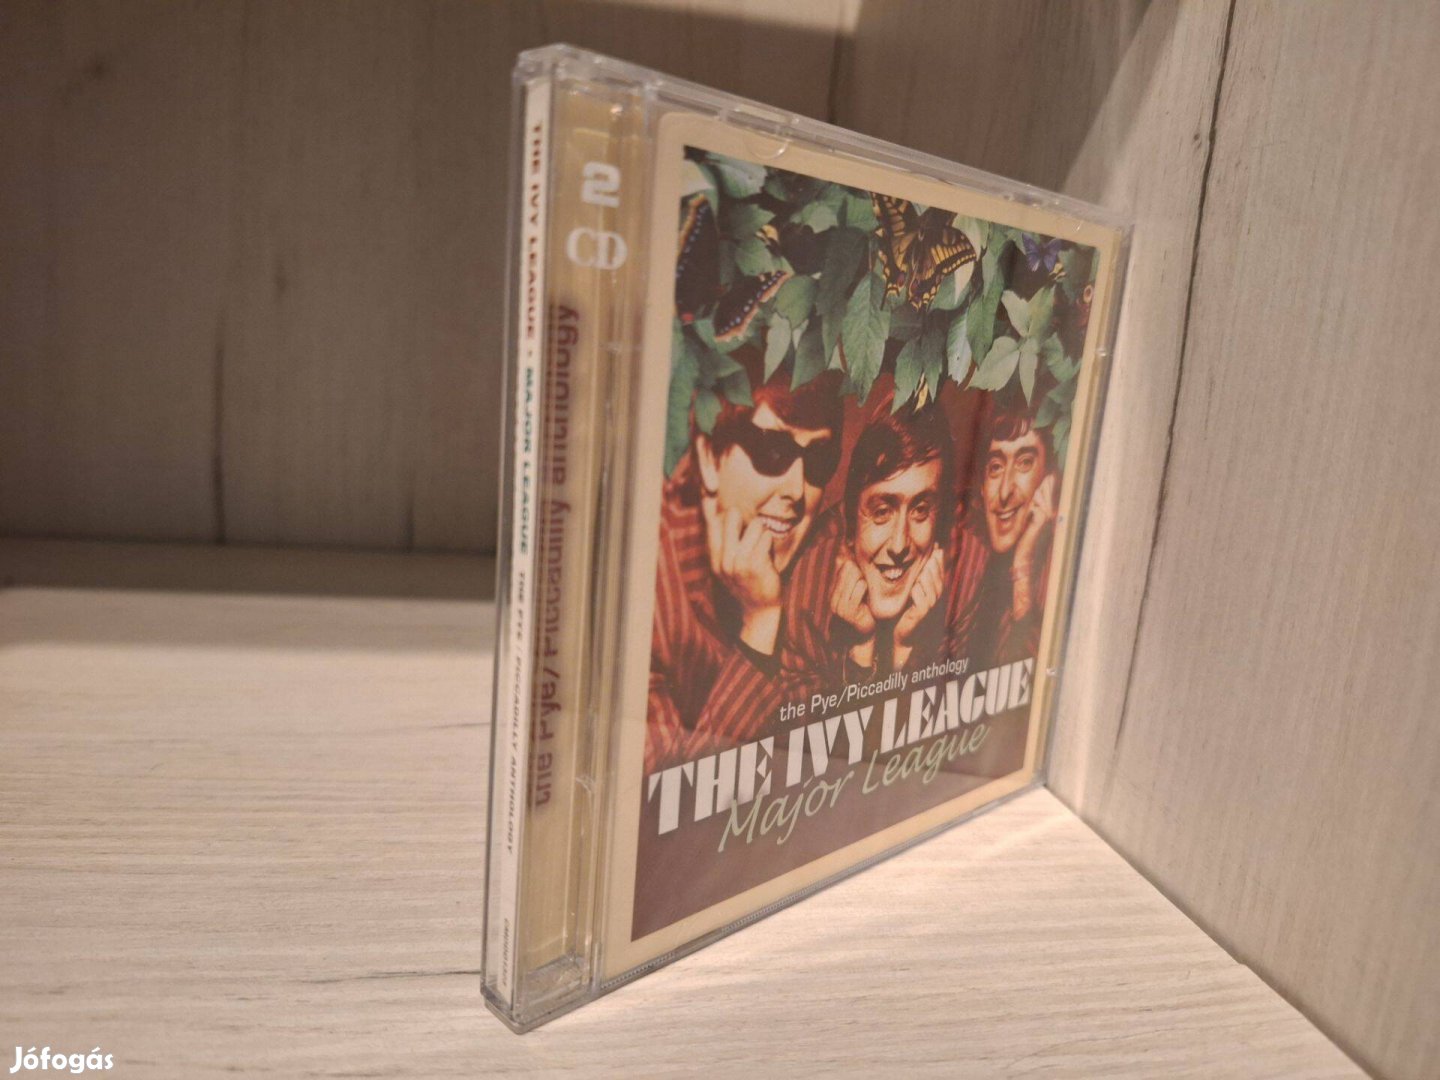 The Ivy League - Major League - The Pye/Piccadilly Anthology dupla CD